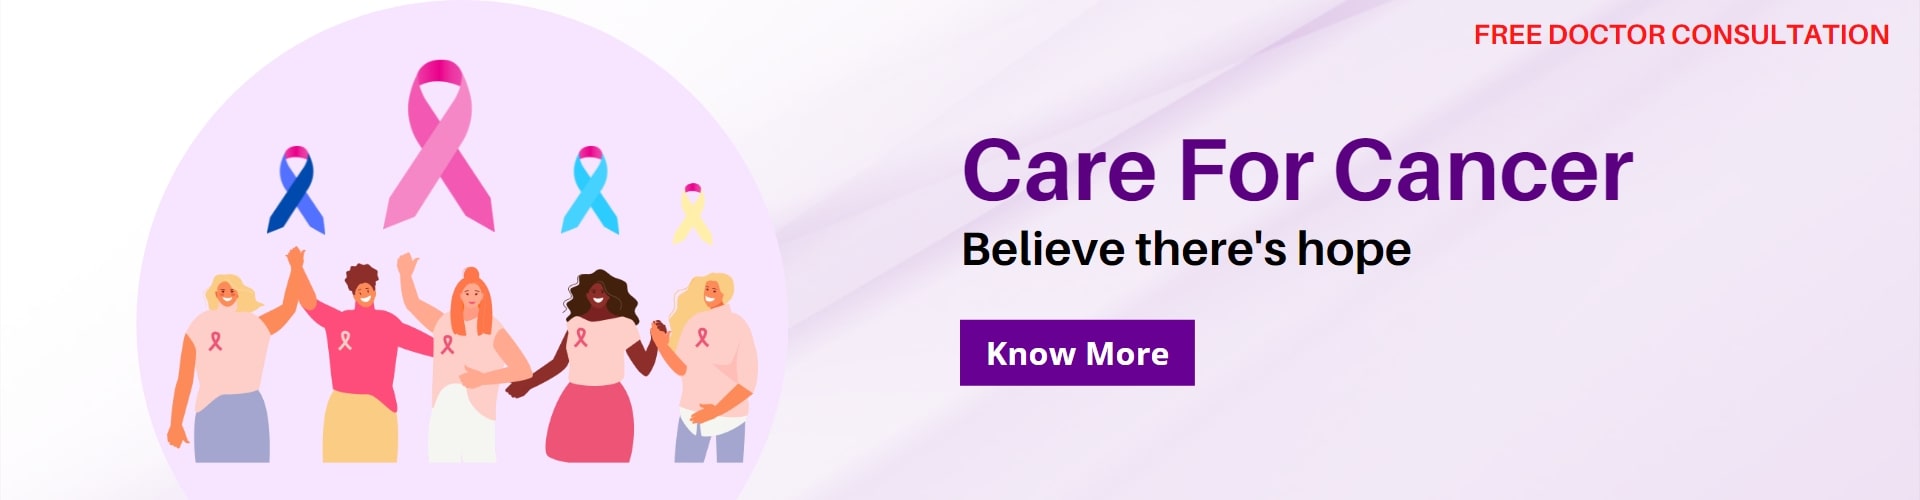 Care-For-Cancer-1